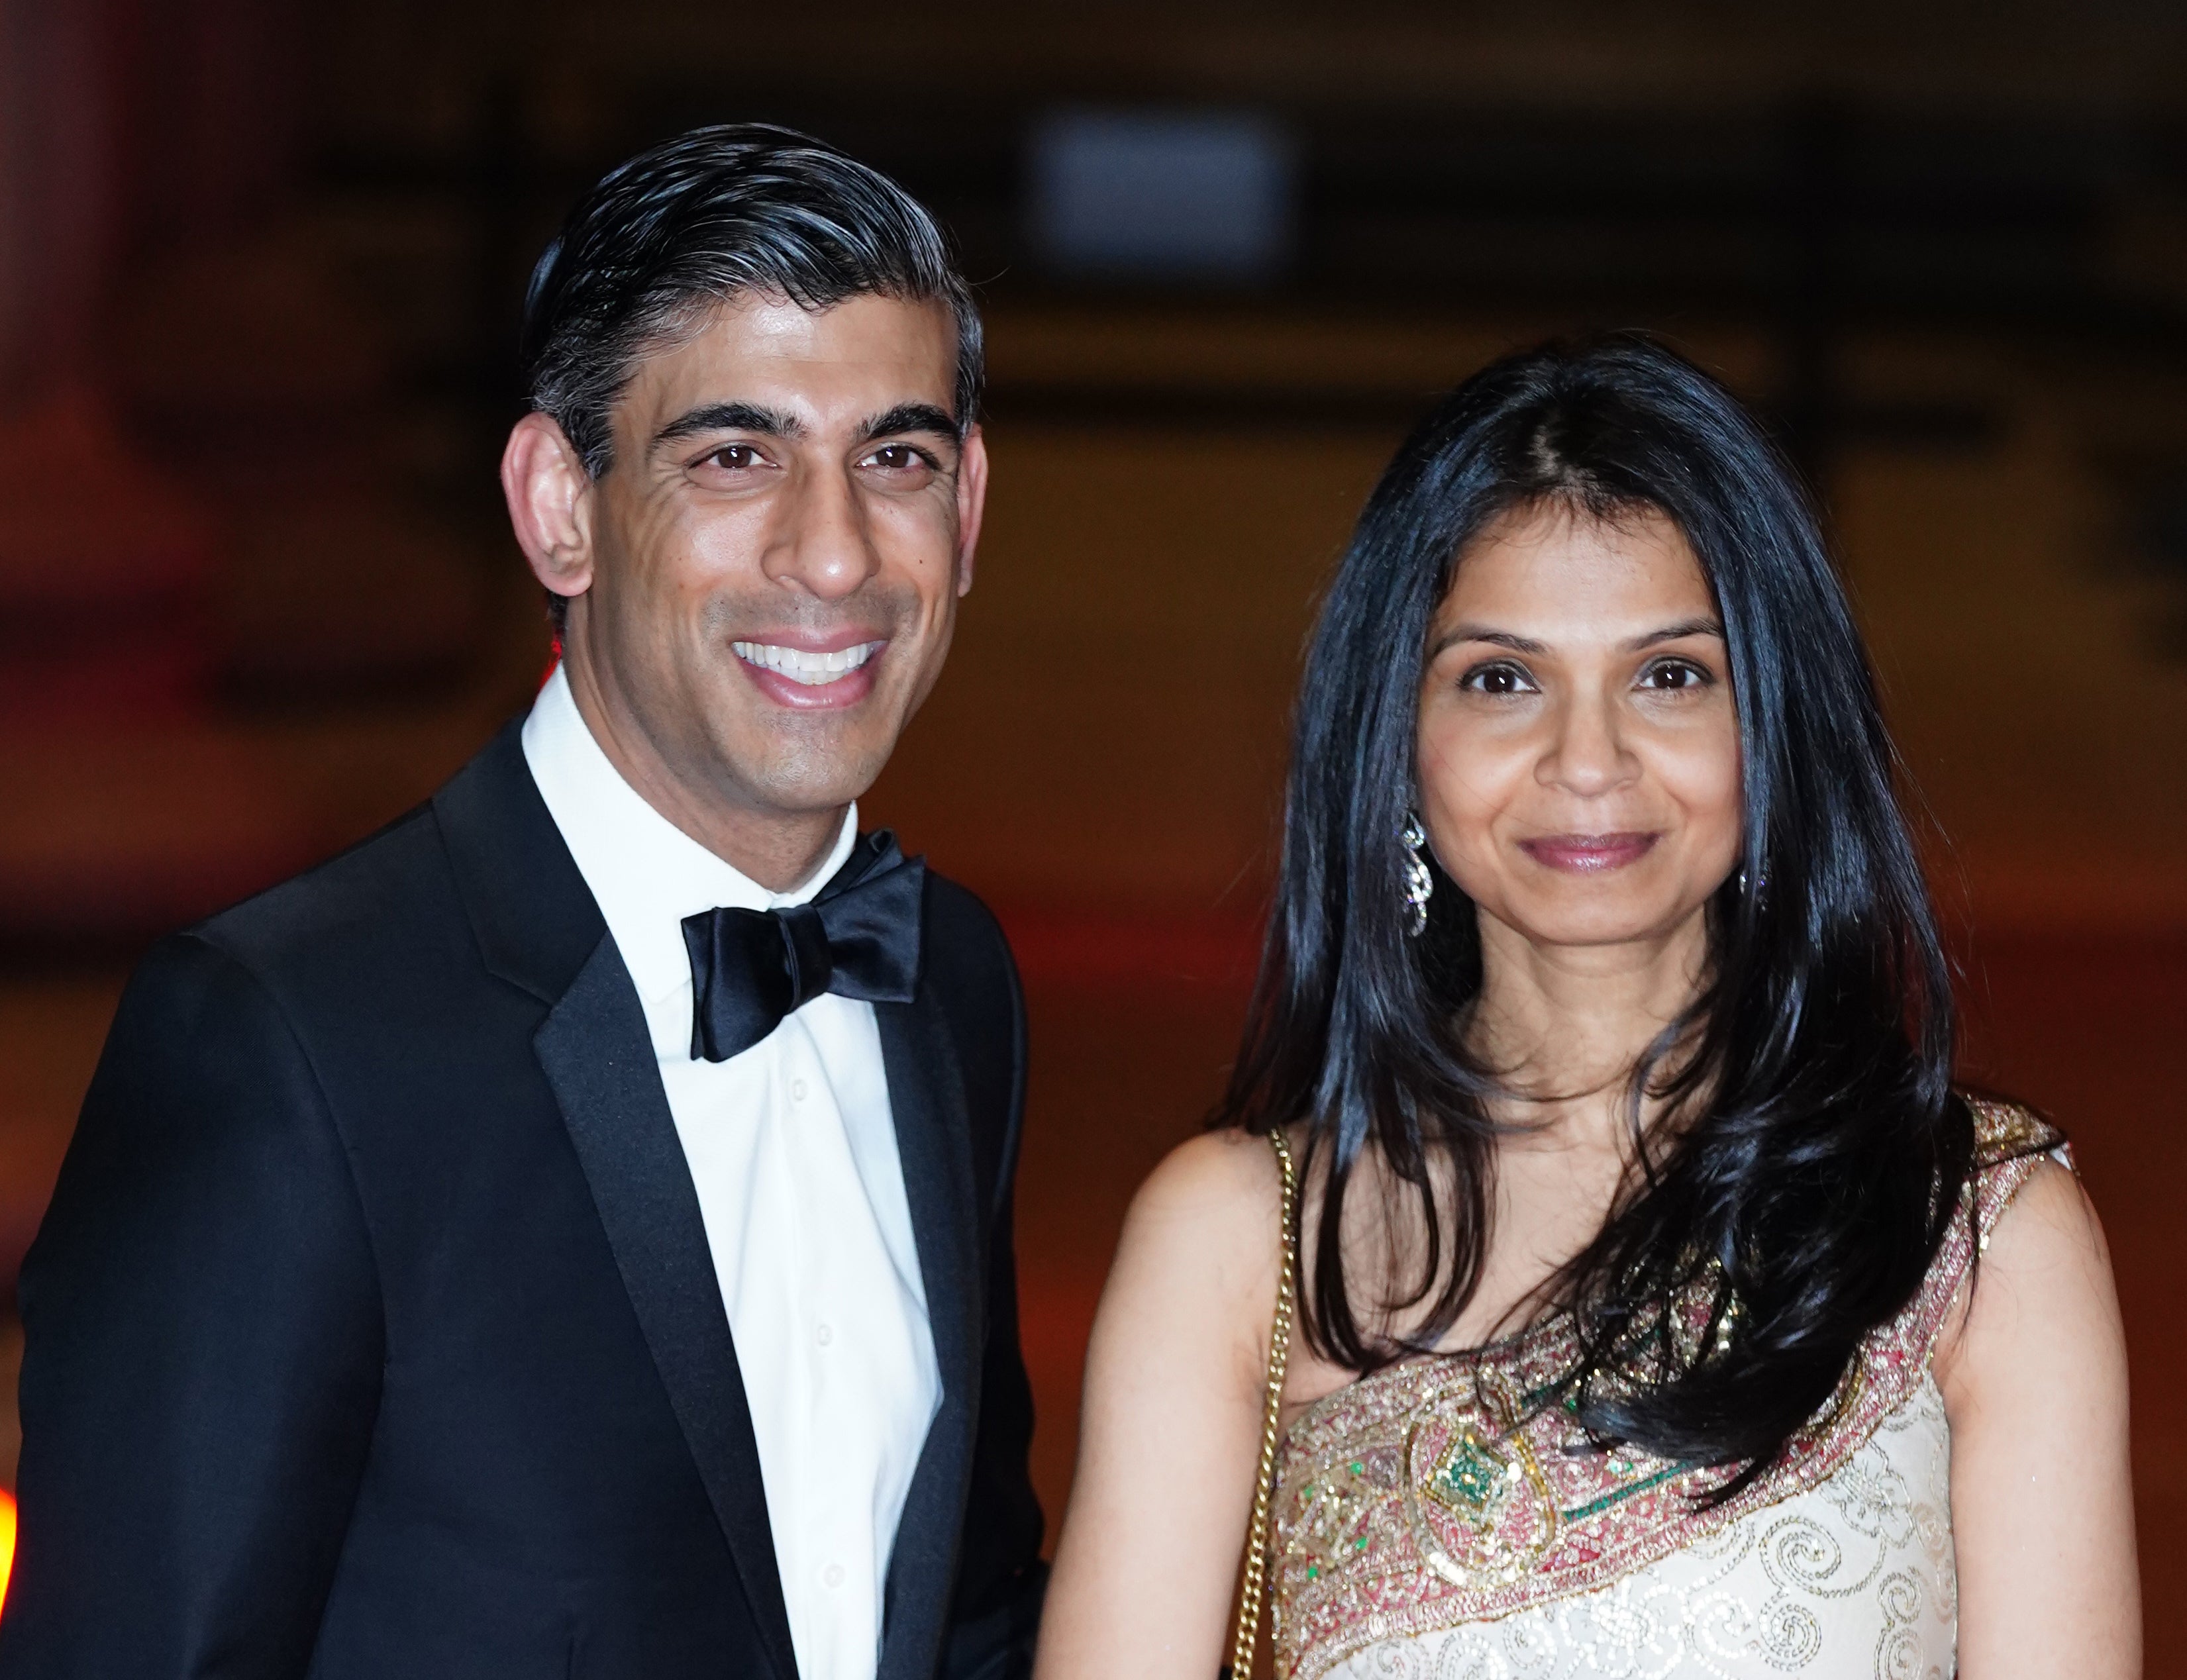 Akshata Murty, Rishi Sunak’s wife, was criticised earlier this year for retaining her “non dom” status.